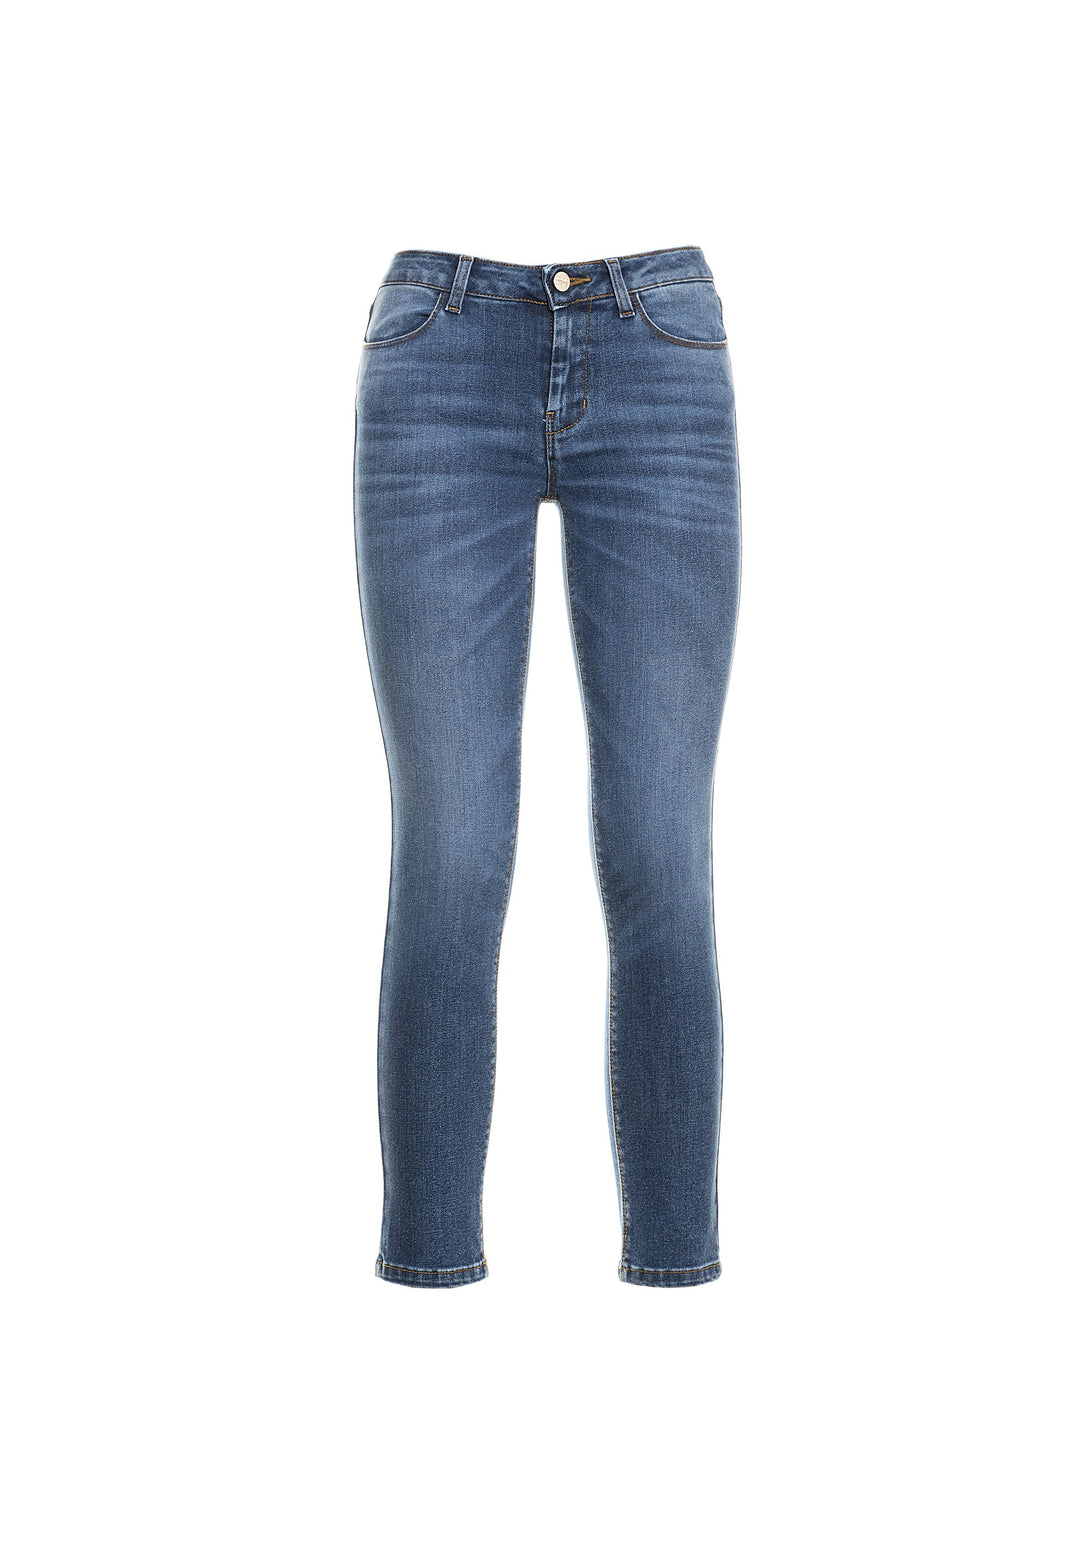 Jeans cropped skinny fit made in stretch denim with middle wash